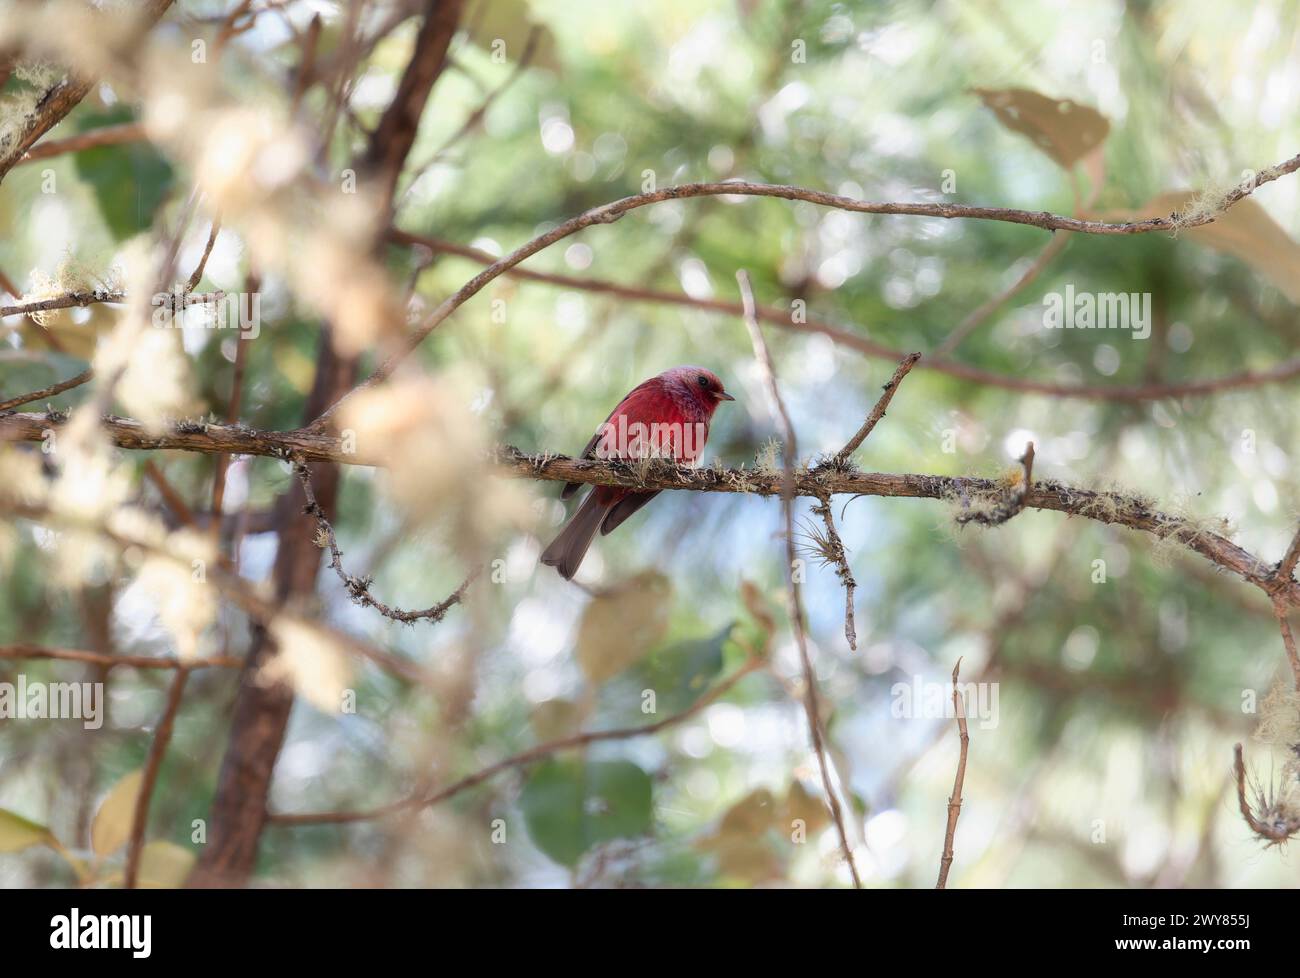 A gorgeous pink-headed warbler, Cardellina versicolor, perched in a tree in Chiapas, Mexico. Stock Photo